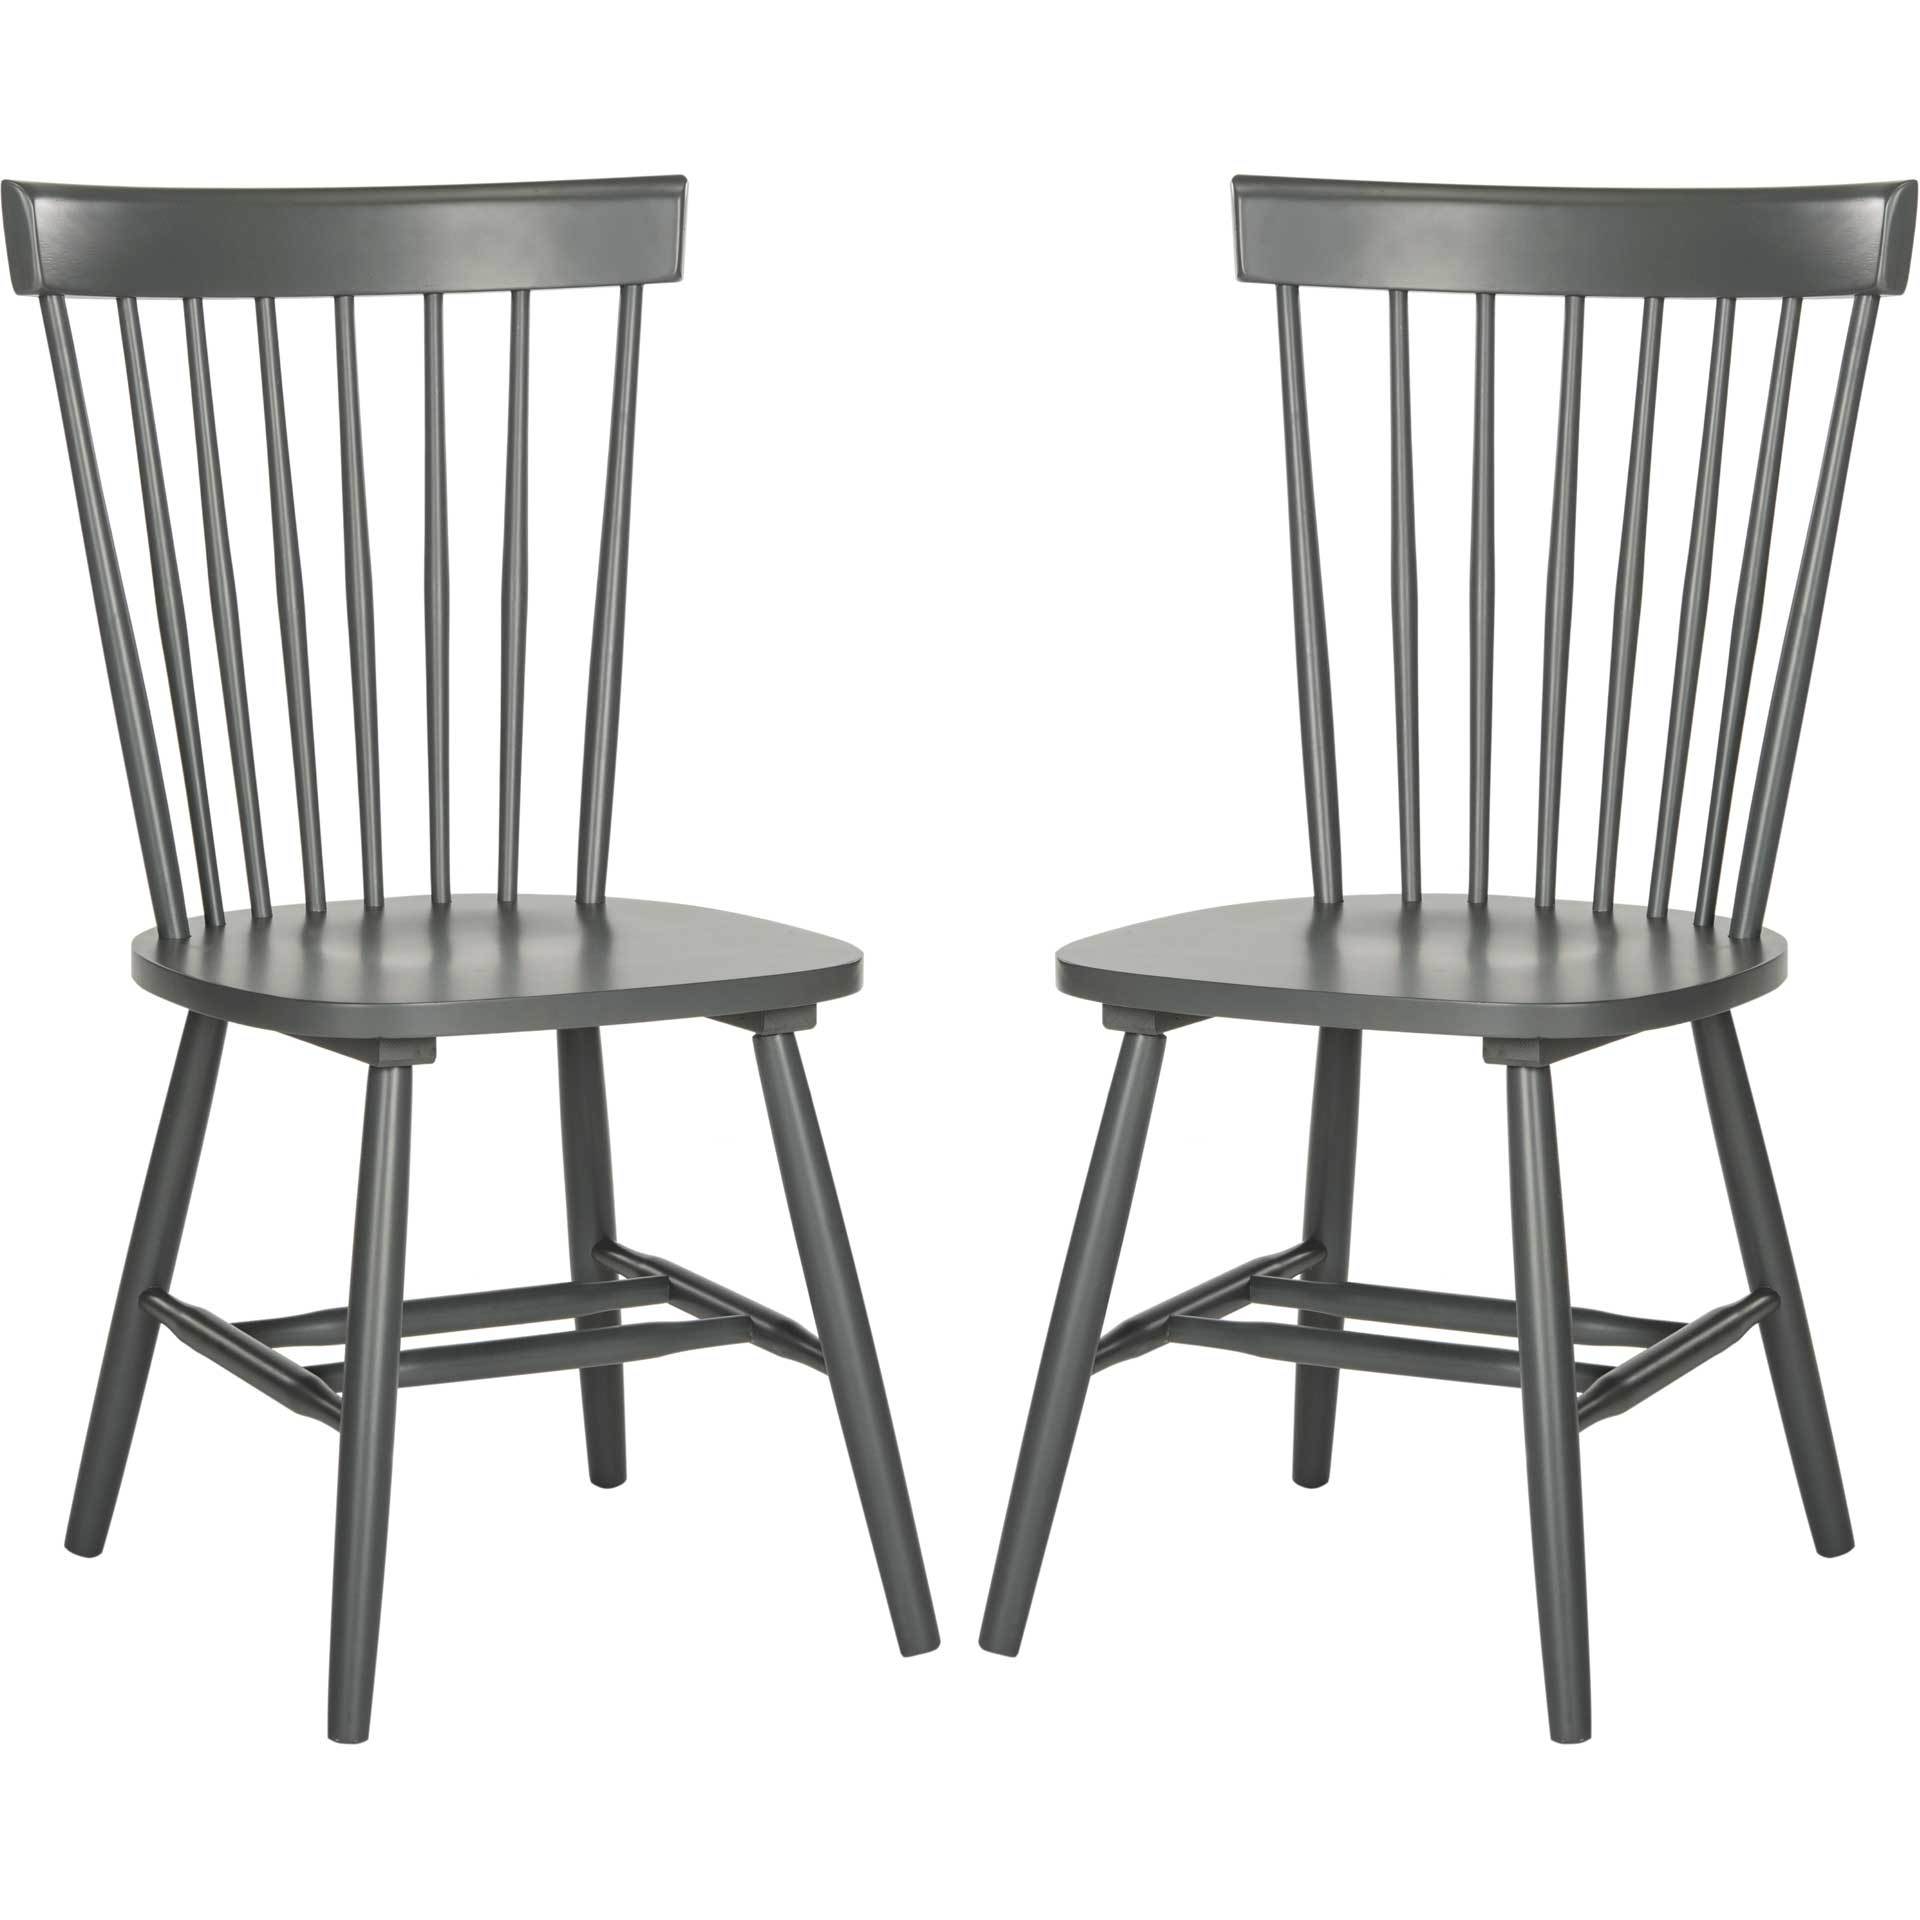 Paula Spindle Dining Chair Charcoal Gray (Set of 2)